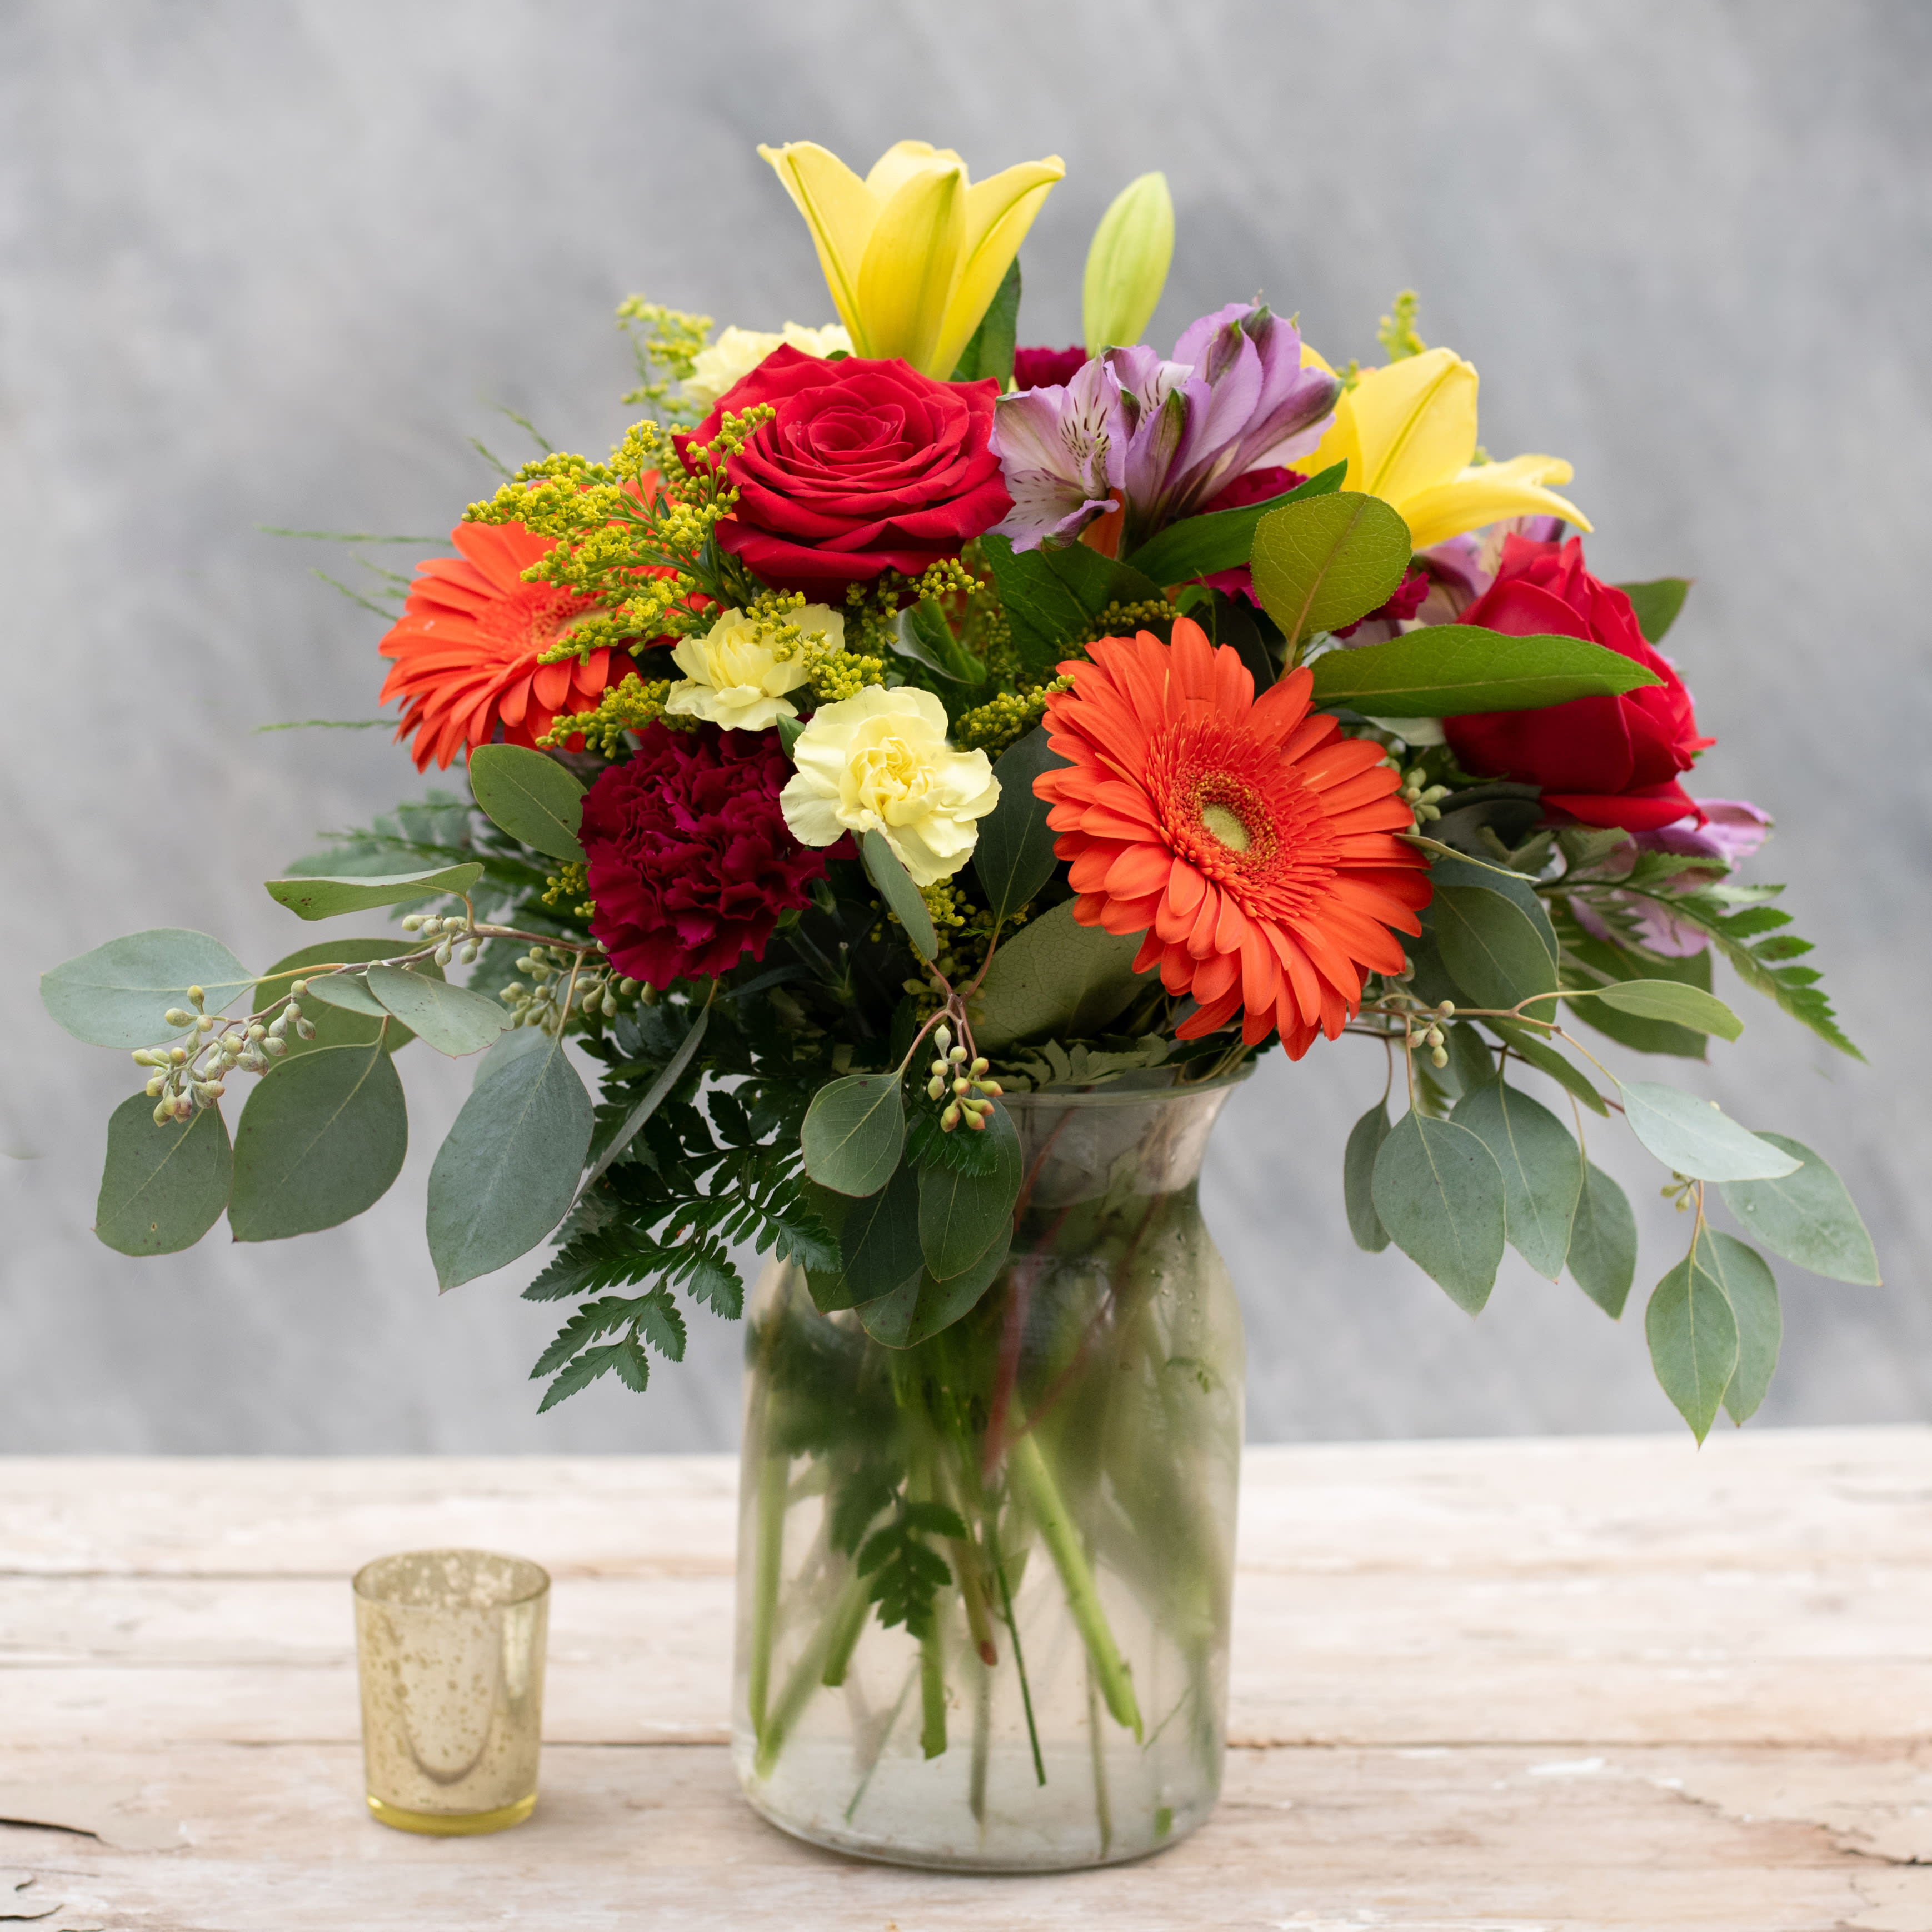 Carlisle - This stunning arrangement would look great on any table in your home or apartment. The clear glass milk jug shaped vase provides a little country feel while the bright and cheery gerbera daisies, roses, lilies, carnations,  